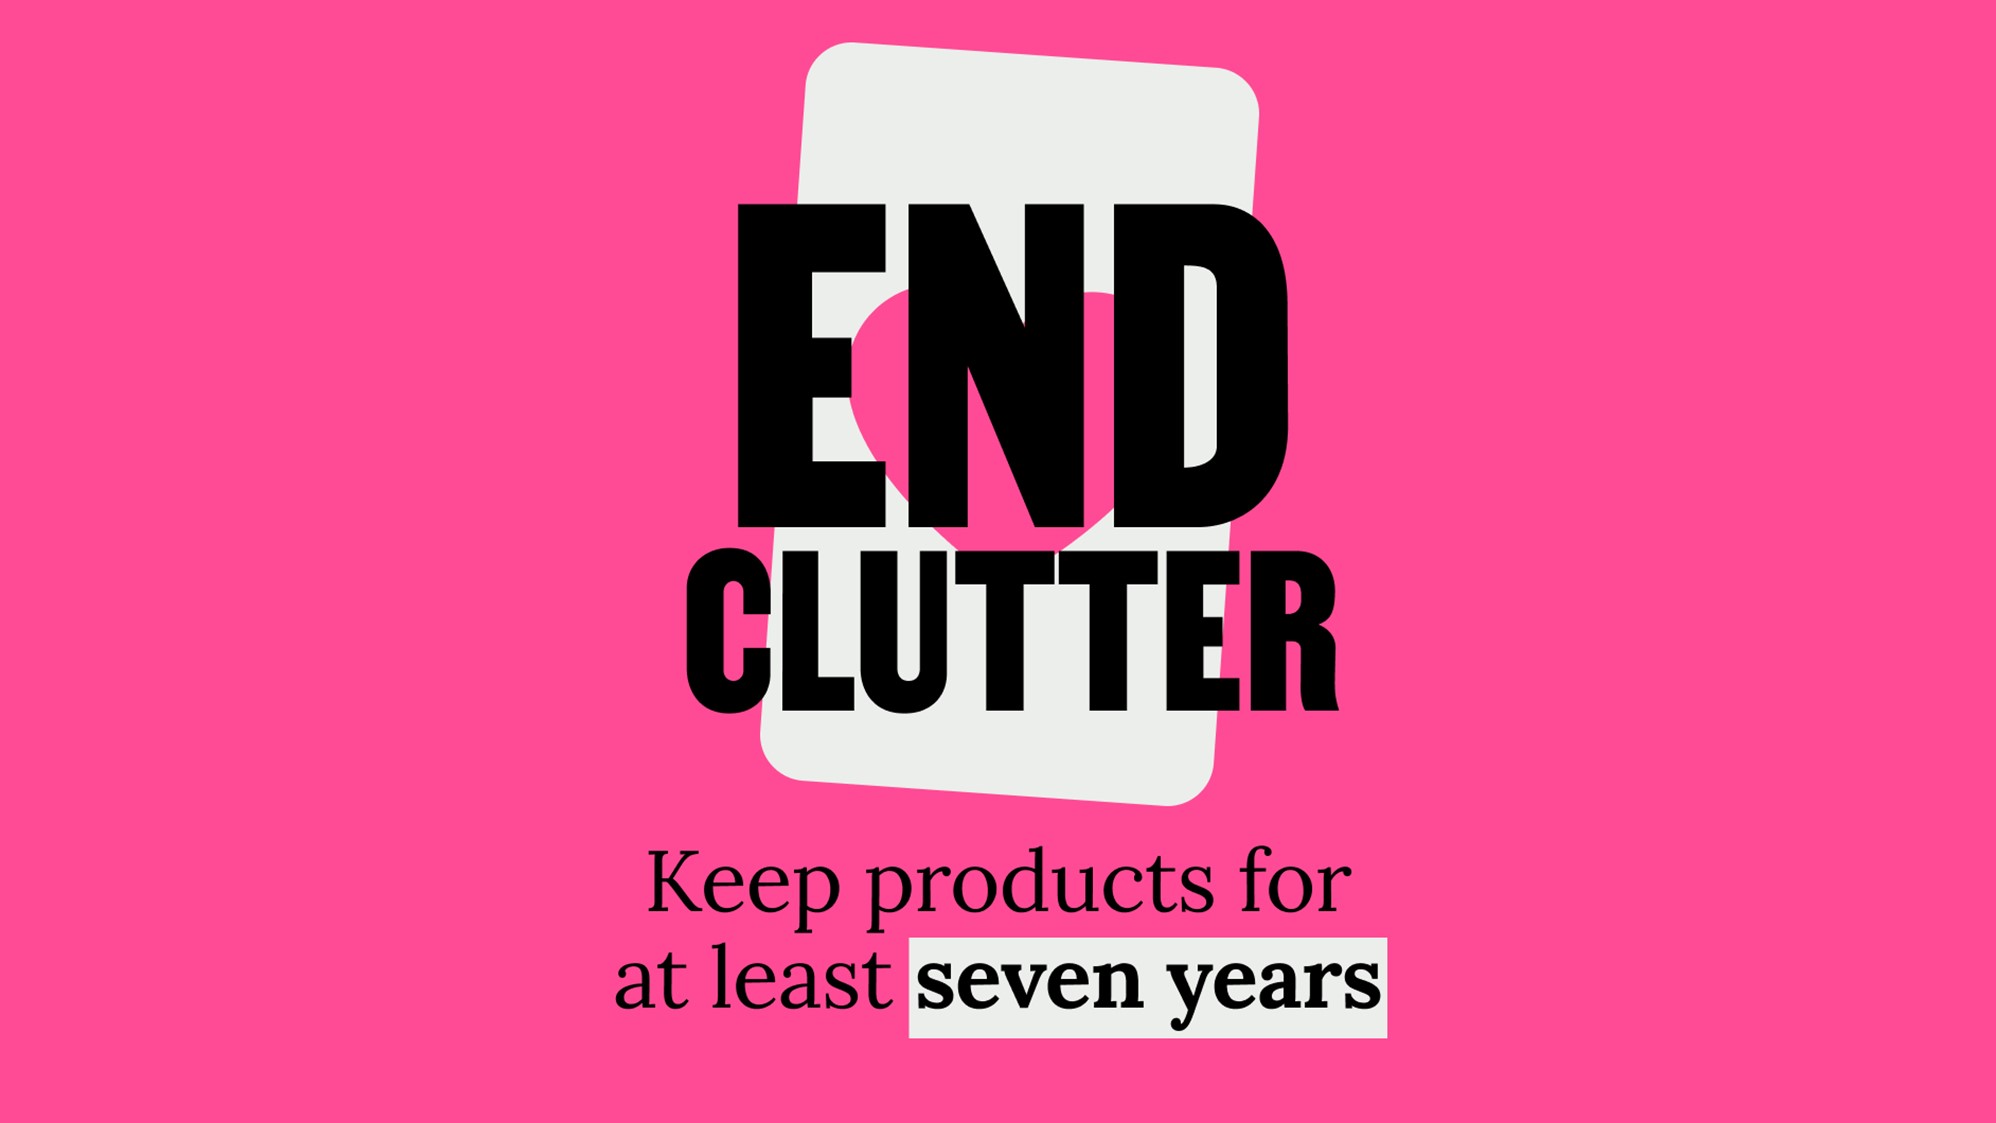 End clutter